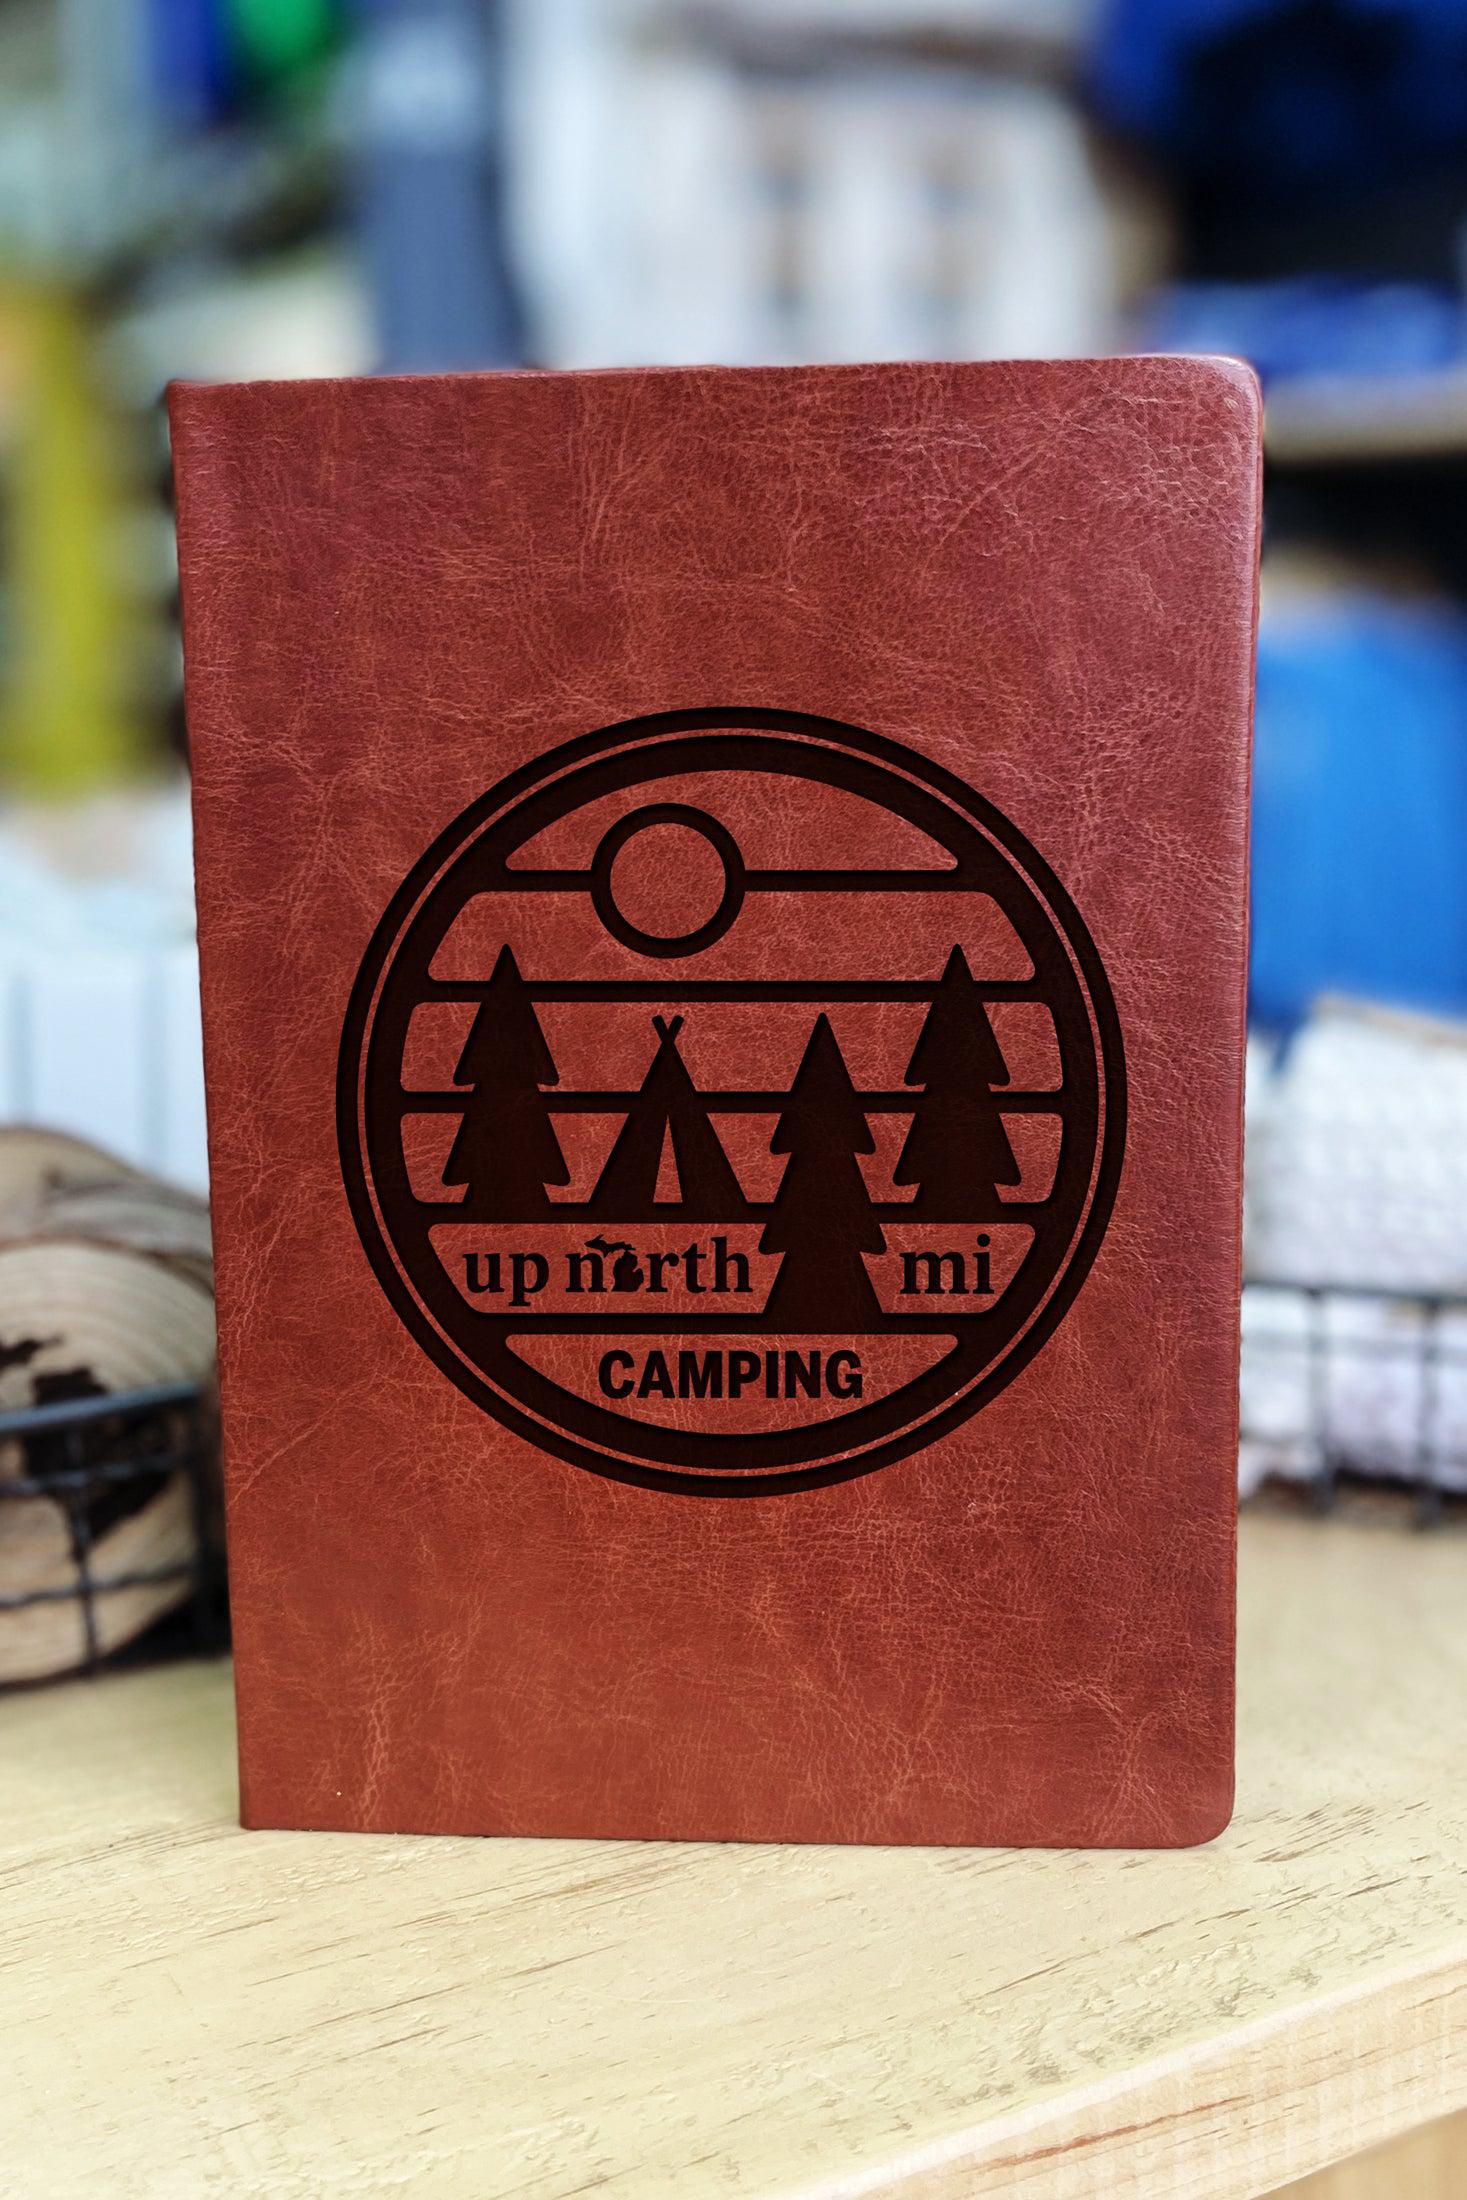 "Up North Mi Camping" - Badge - Leather Journal